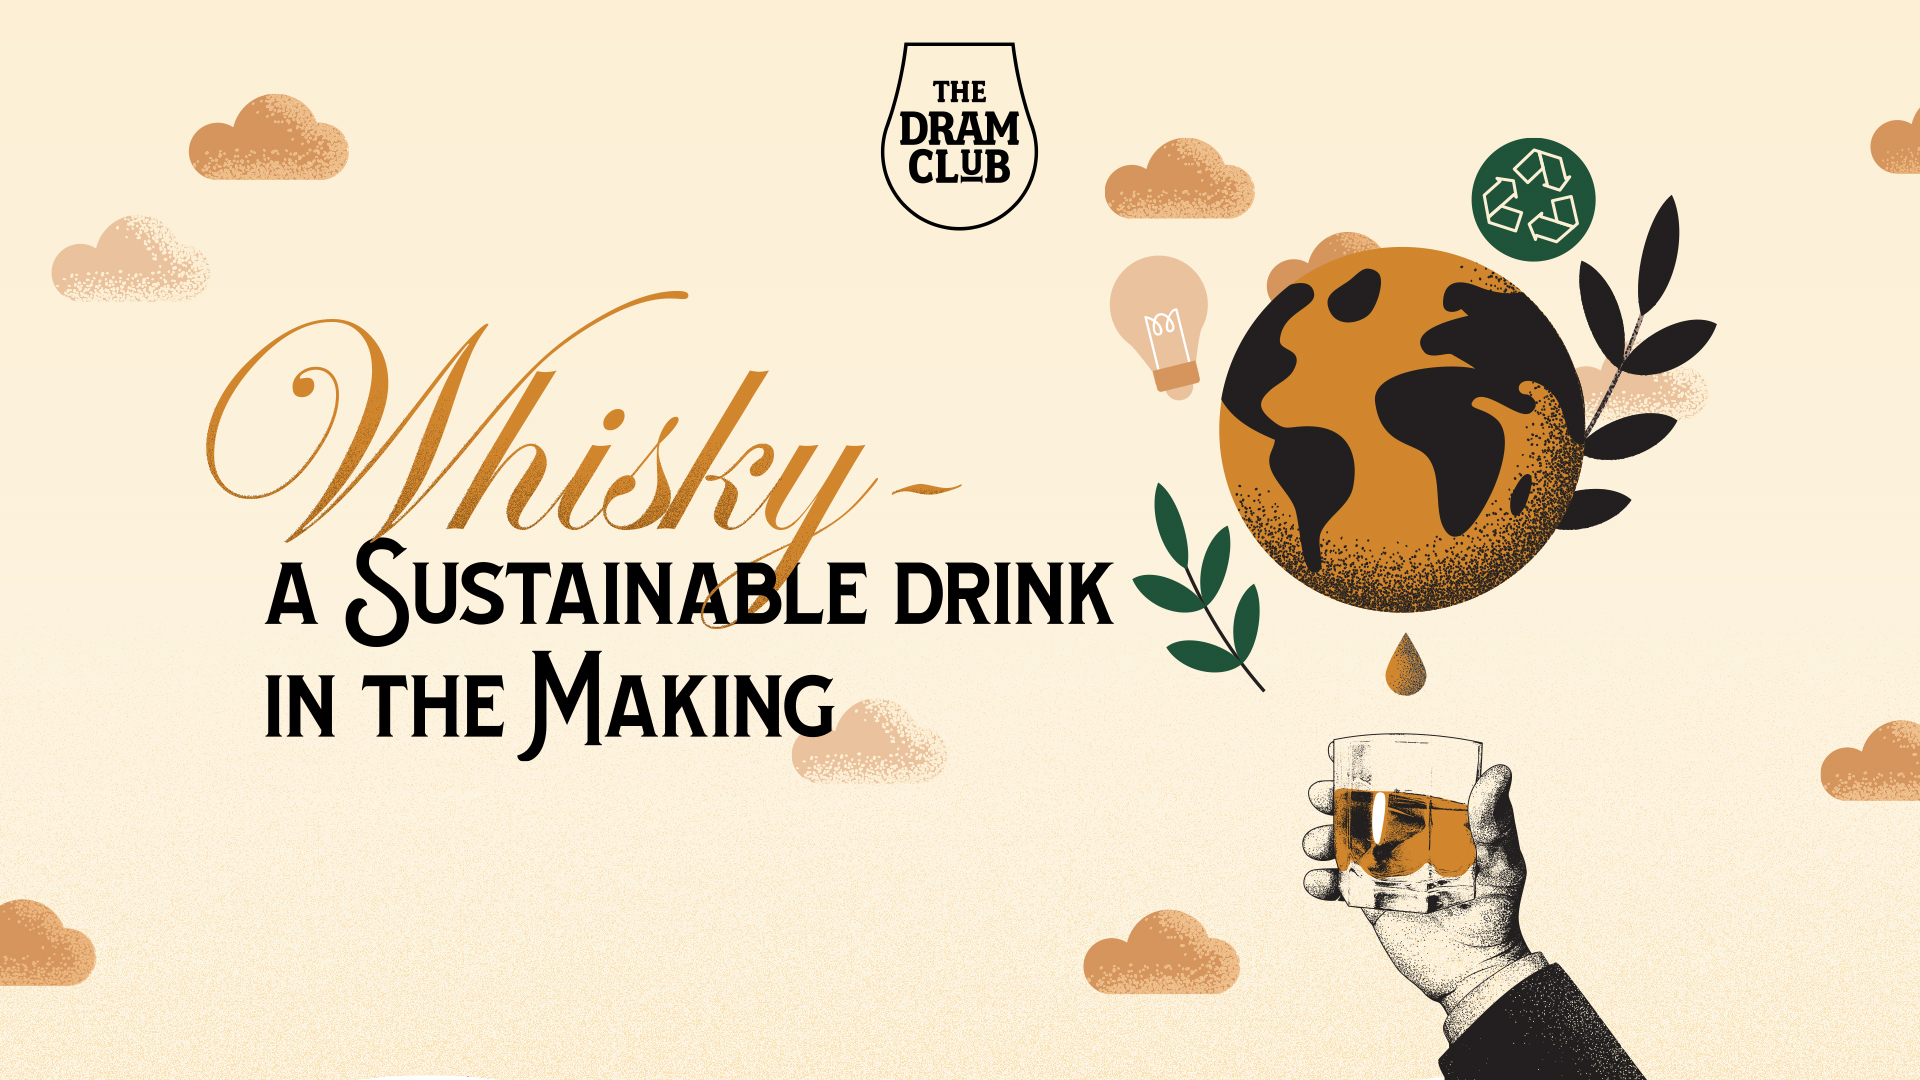 Whisky – A Sustainable Drink in the Making